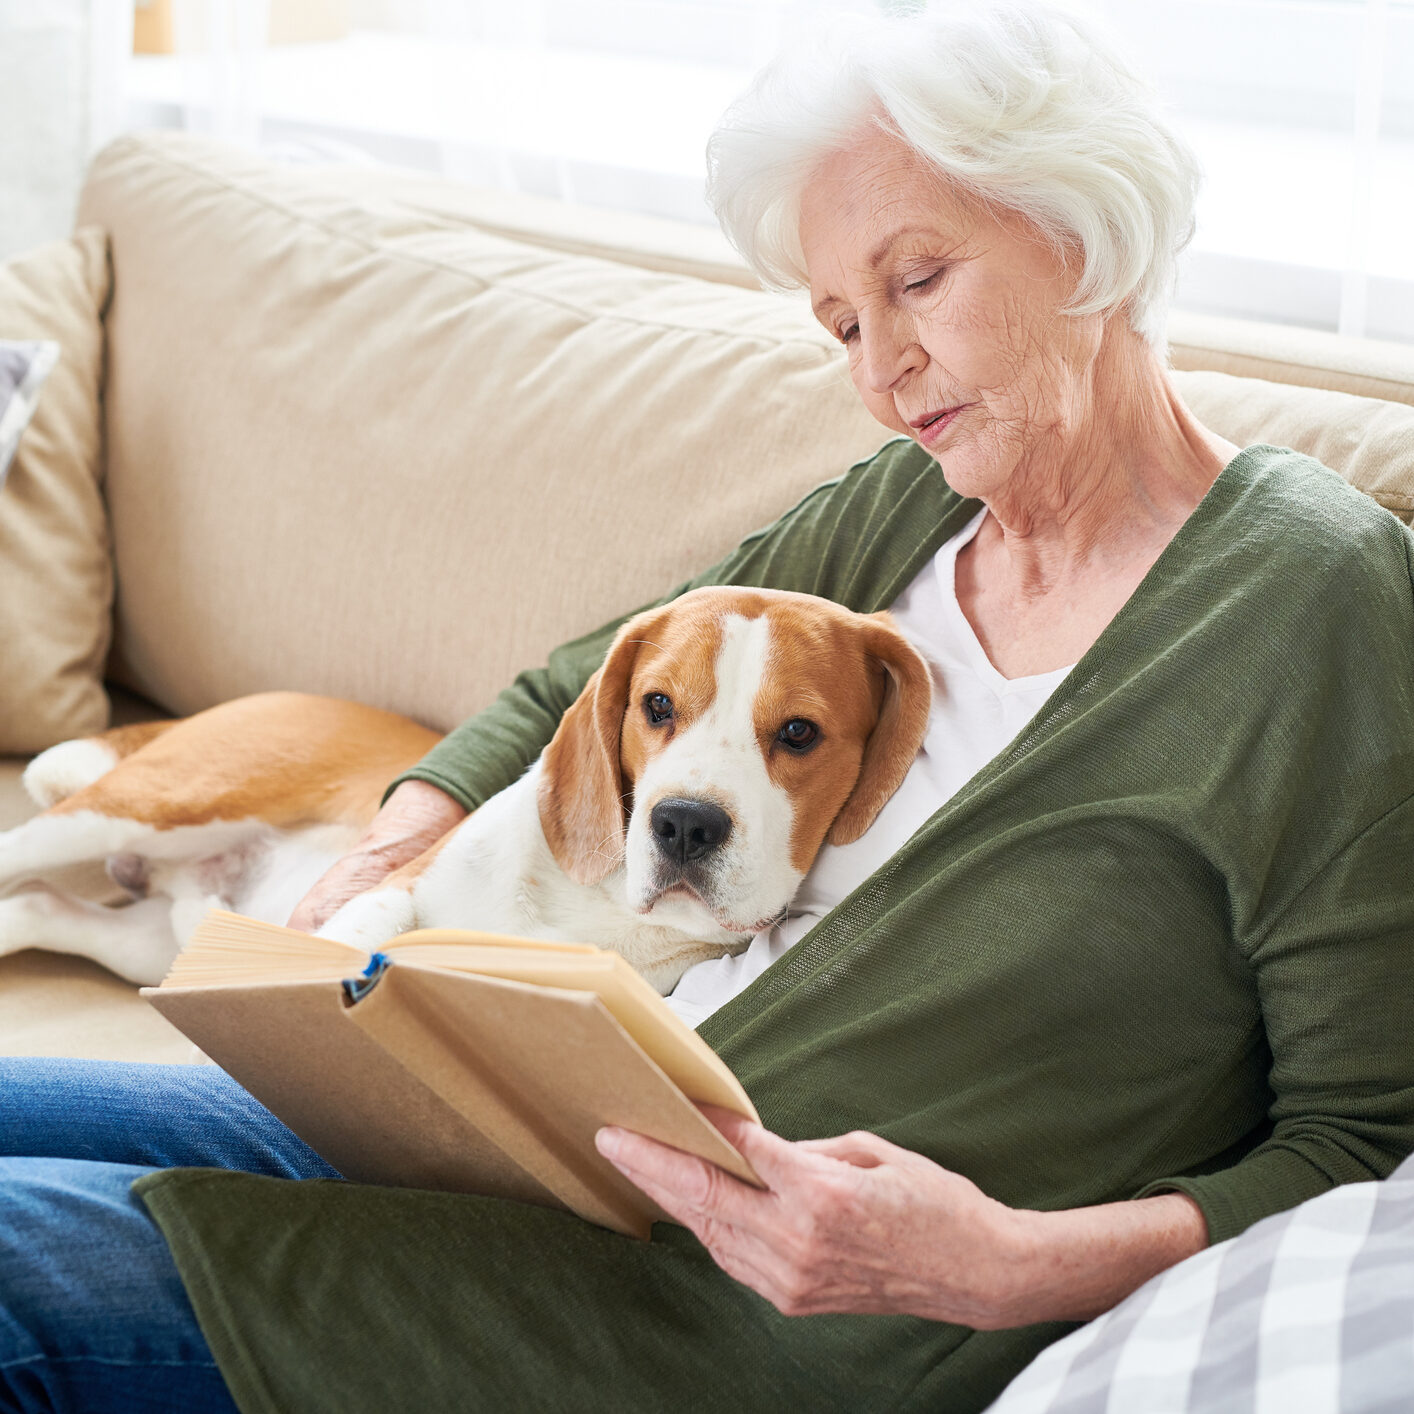 Serious concentrated senior woman with white hair reading interesting book and hugging favorite Beagle dog while sitting on sofa in living room